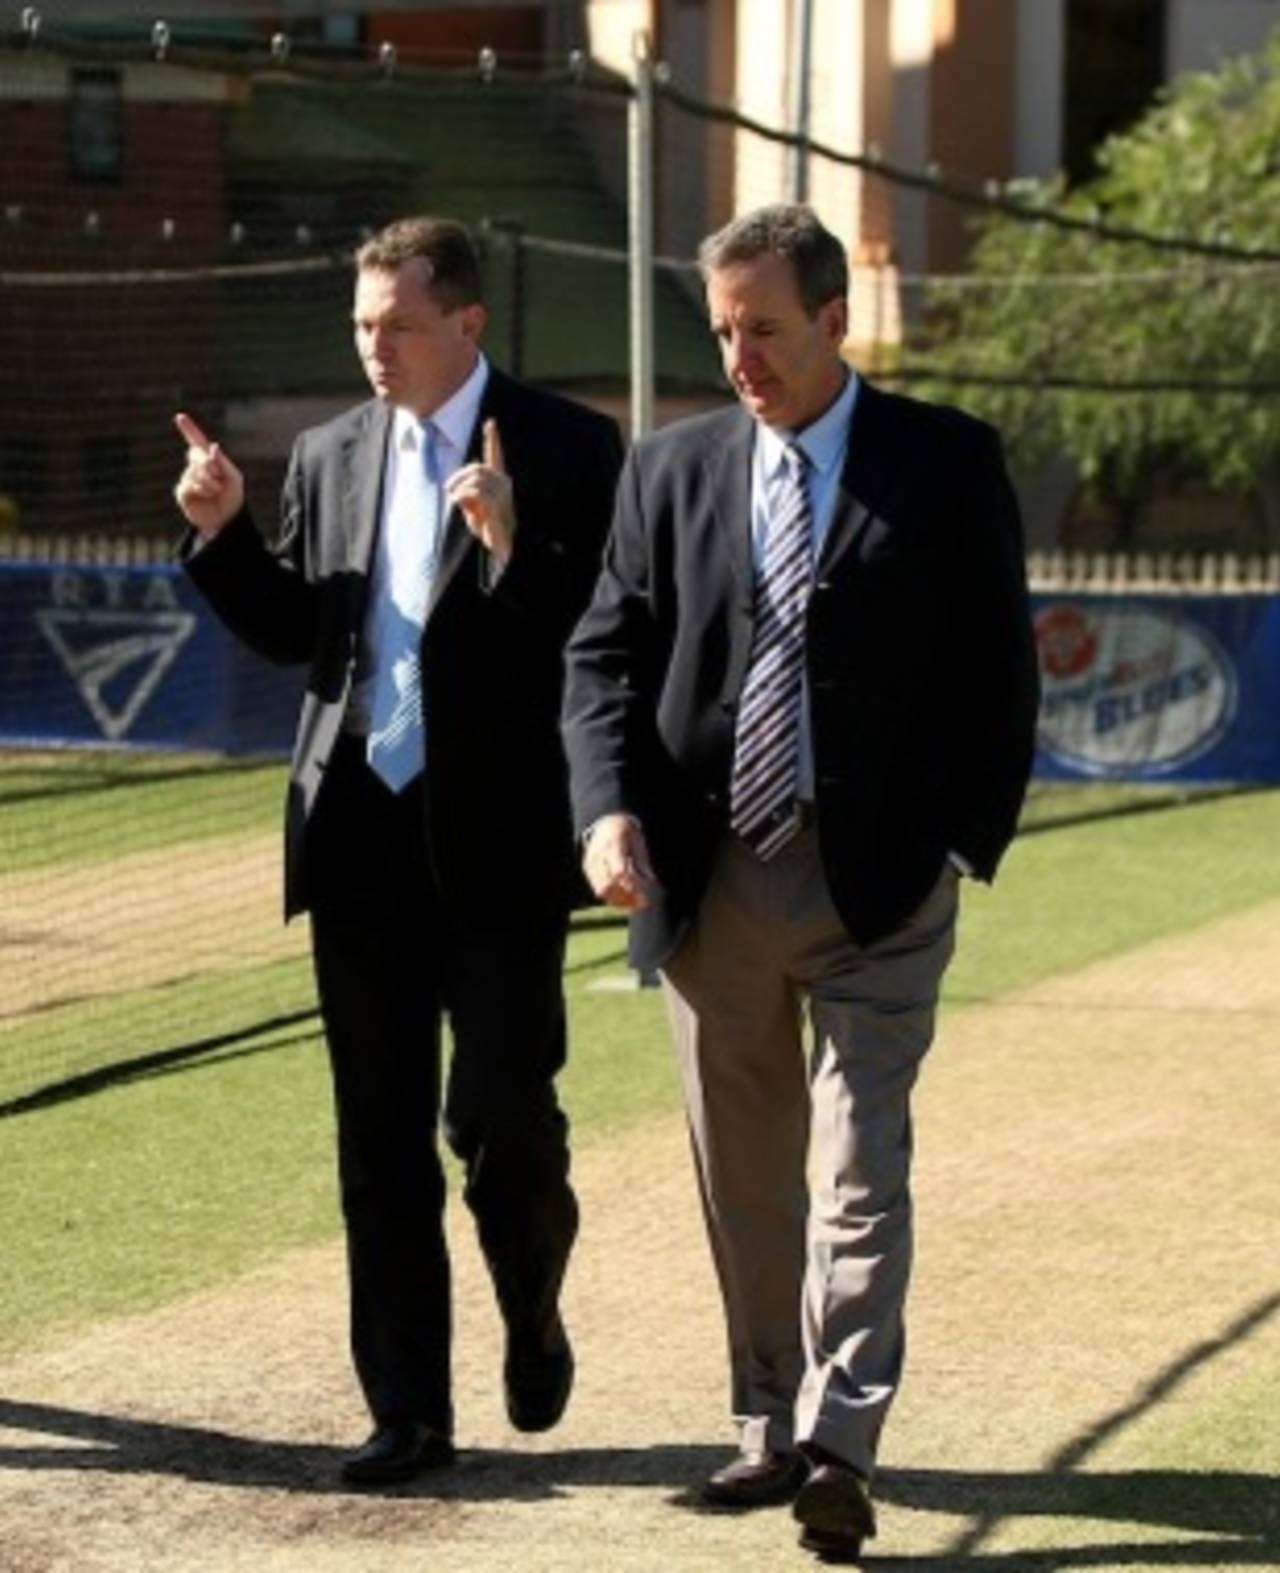 Dave Gilbert, seen here with the former NSW Premier Nathan Rees, had been the CEO of the state association since 2001&nbsp;&nbsp;&bull;&nbsp;&nbsp;Getty Images